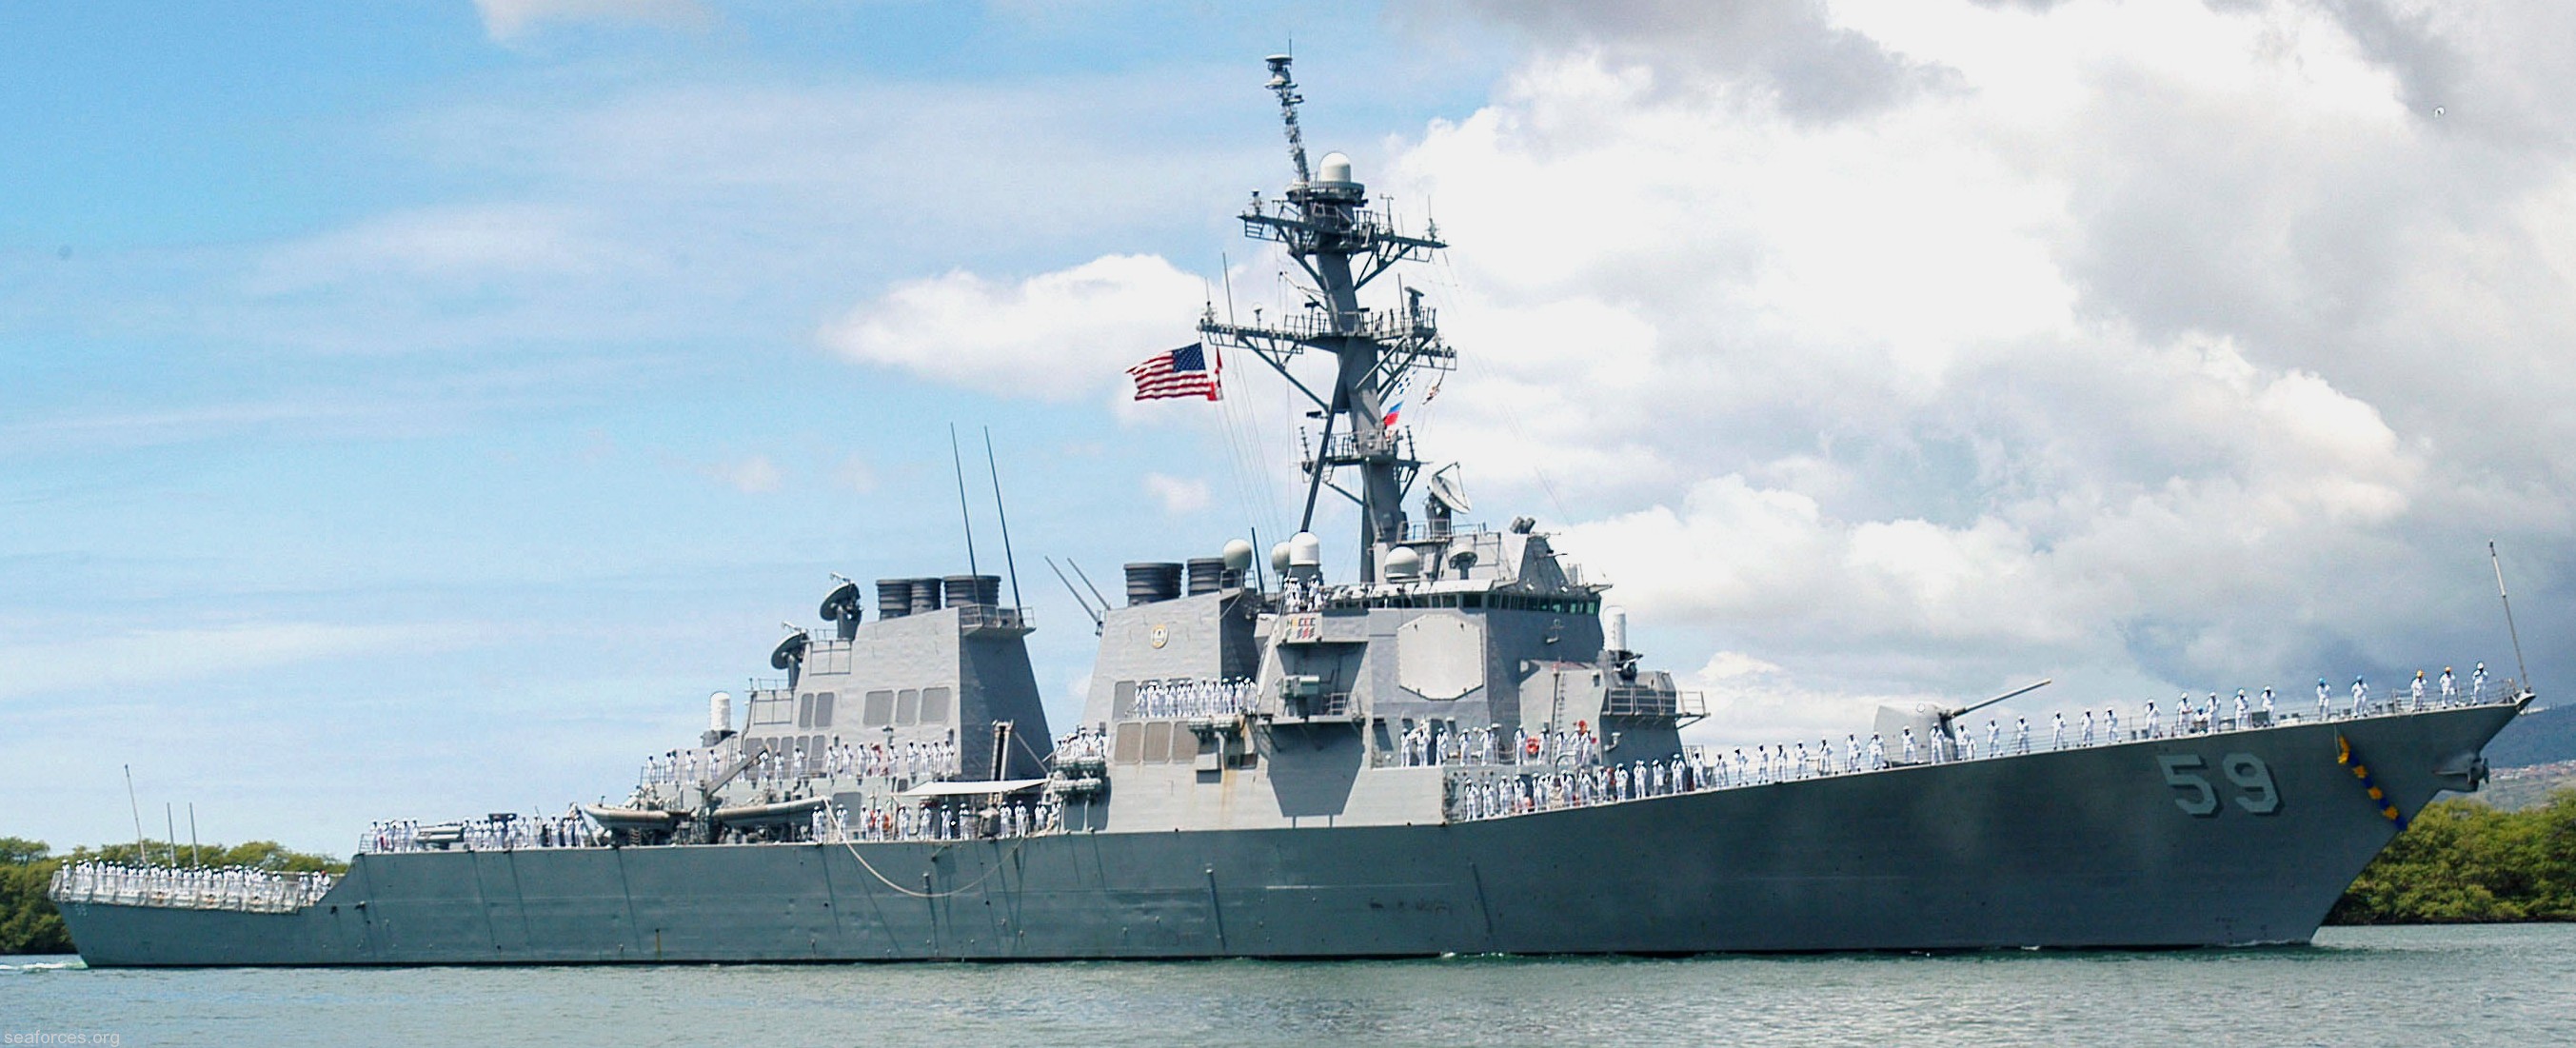 ddg-59 uss russell guided missile destroyer us navy 45